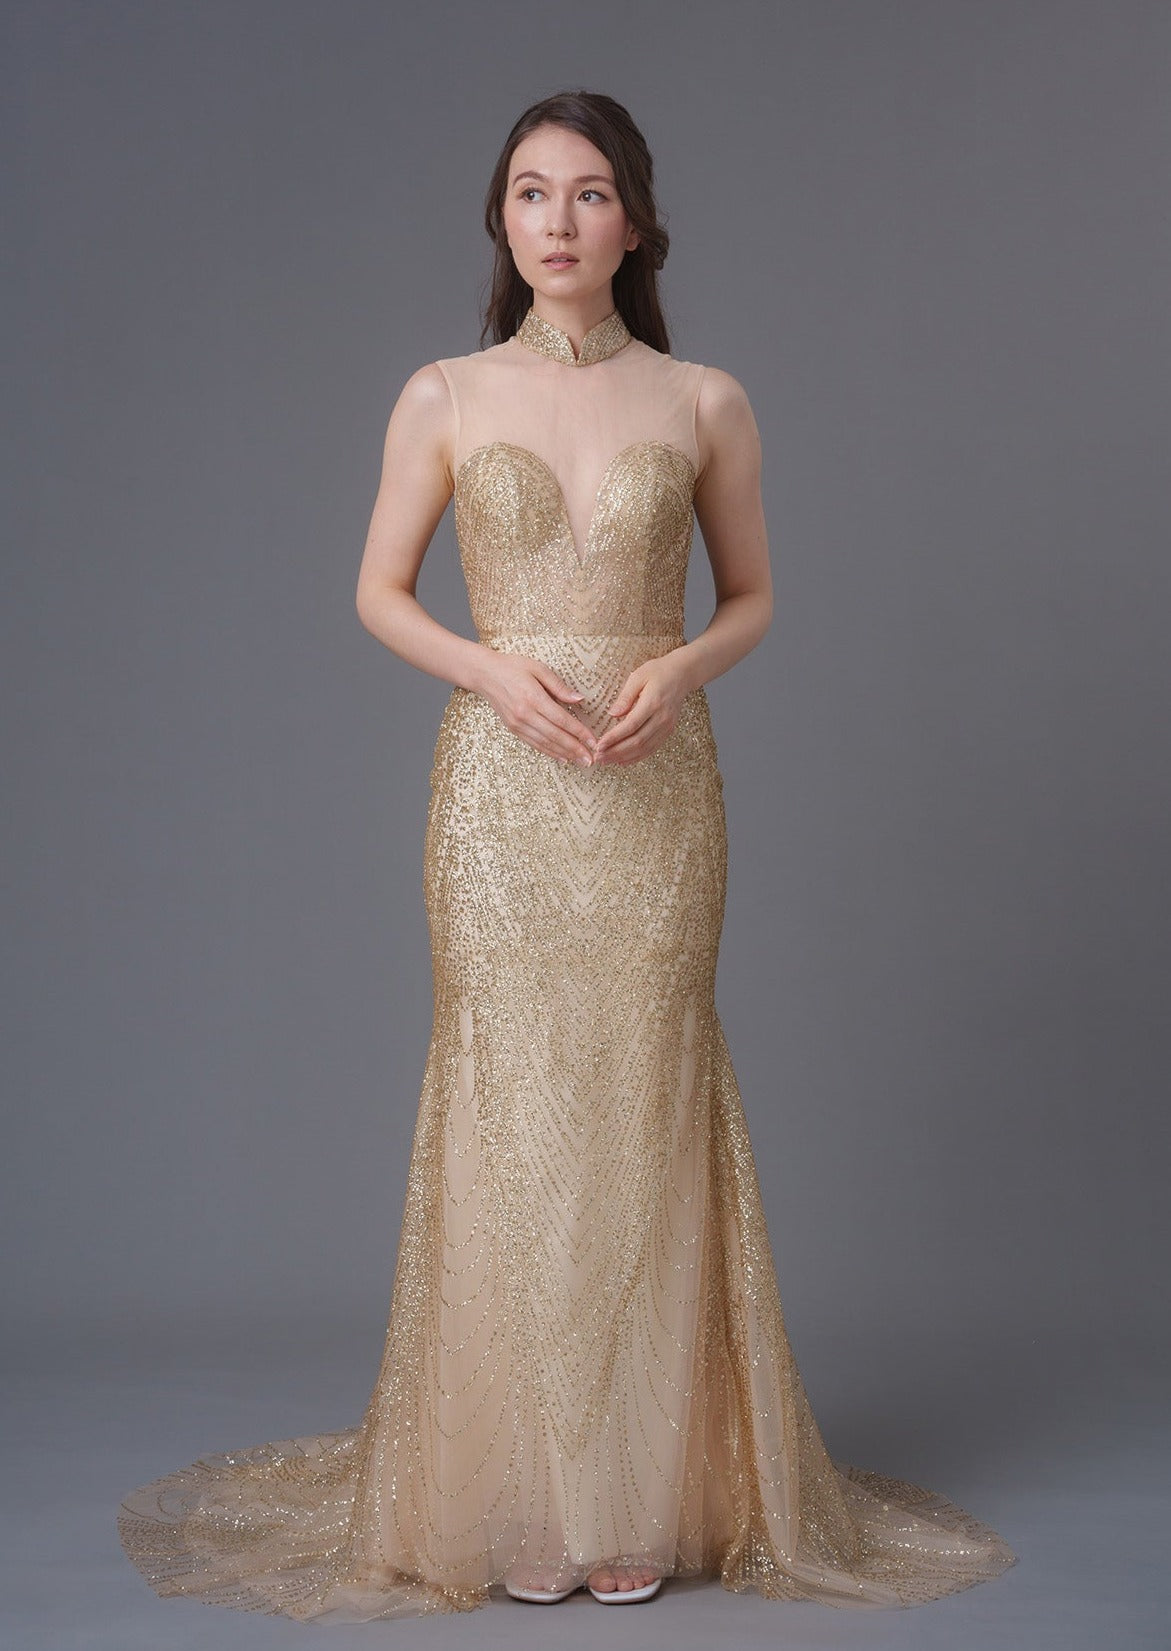 An asian girl in a sleeveless gold sequins mermaid qipao with mesh heart shape bodice. Perfect dress for cocktail parties/ wedding. (full body picture)